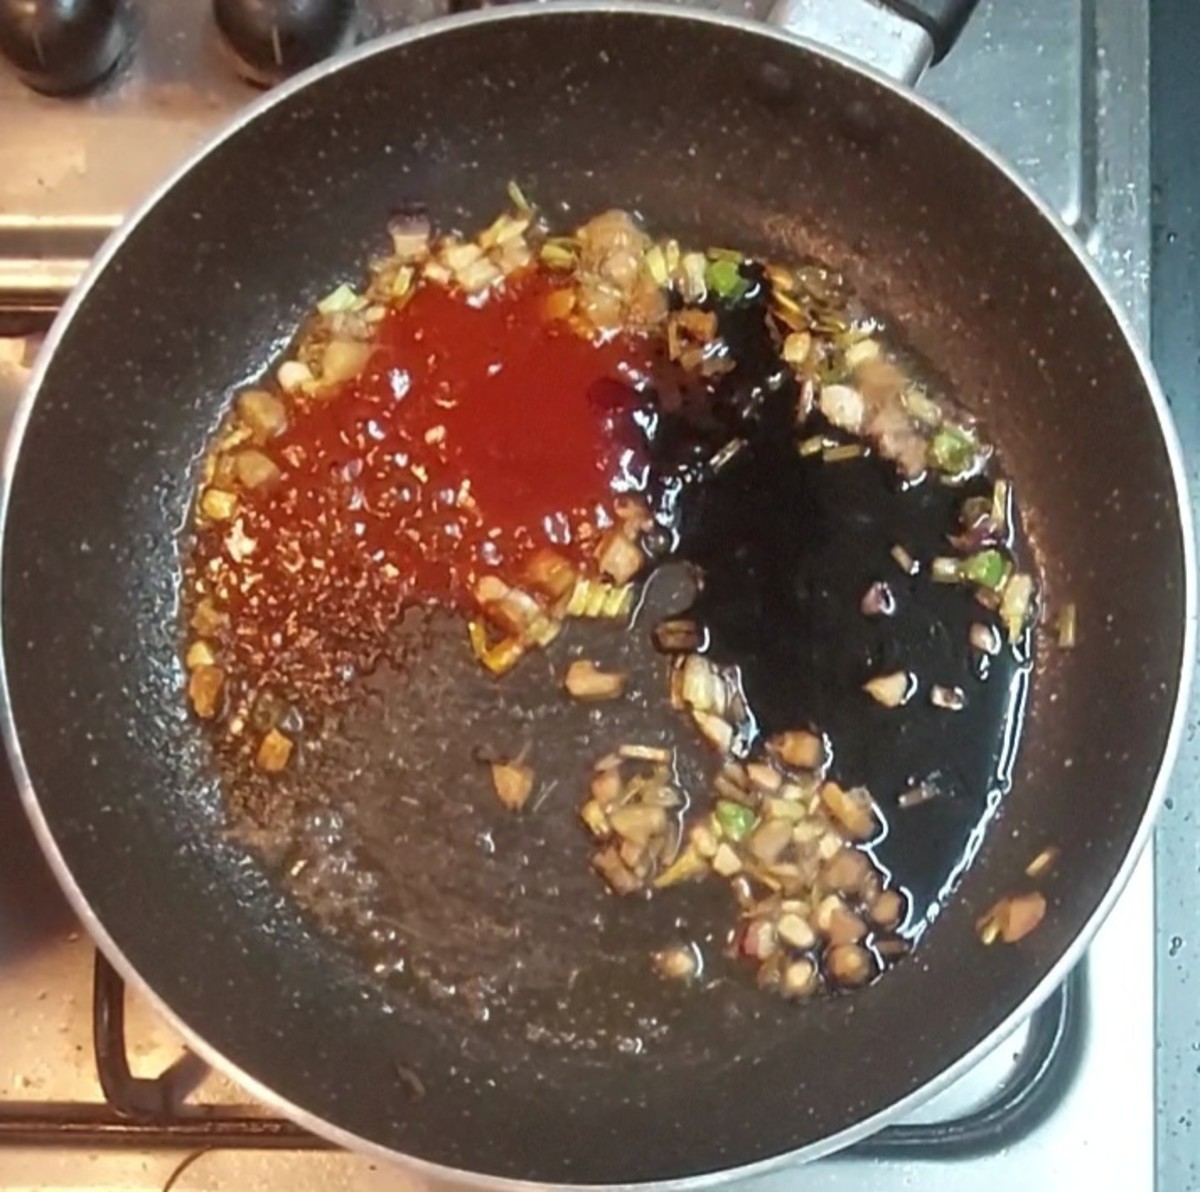 Add 2 tablespoons tomato sauce and 2 tablespoons soy sauce. Mix well.